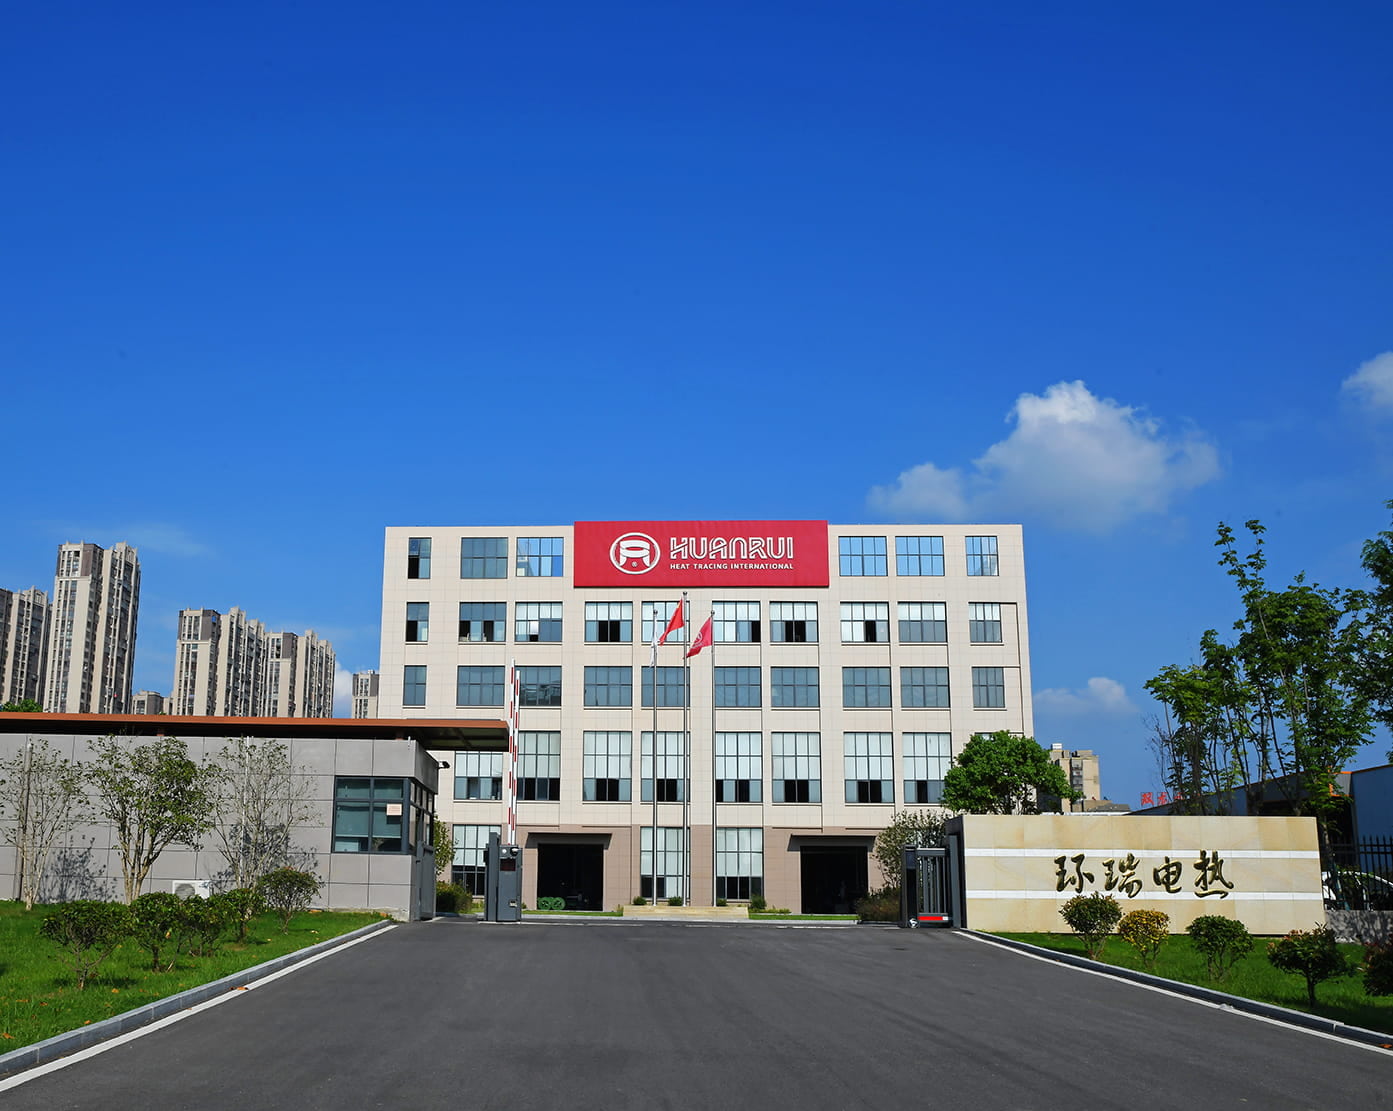 New Factory New Look/Anhui Huanrui's Original Intention Has Not Changed/Forge Ahead